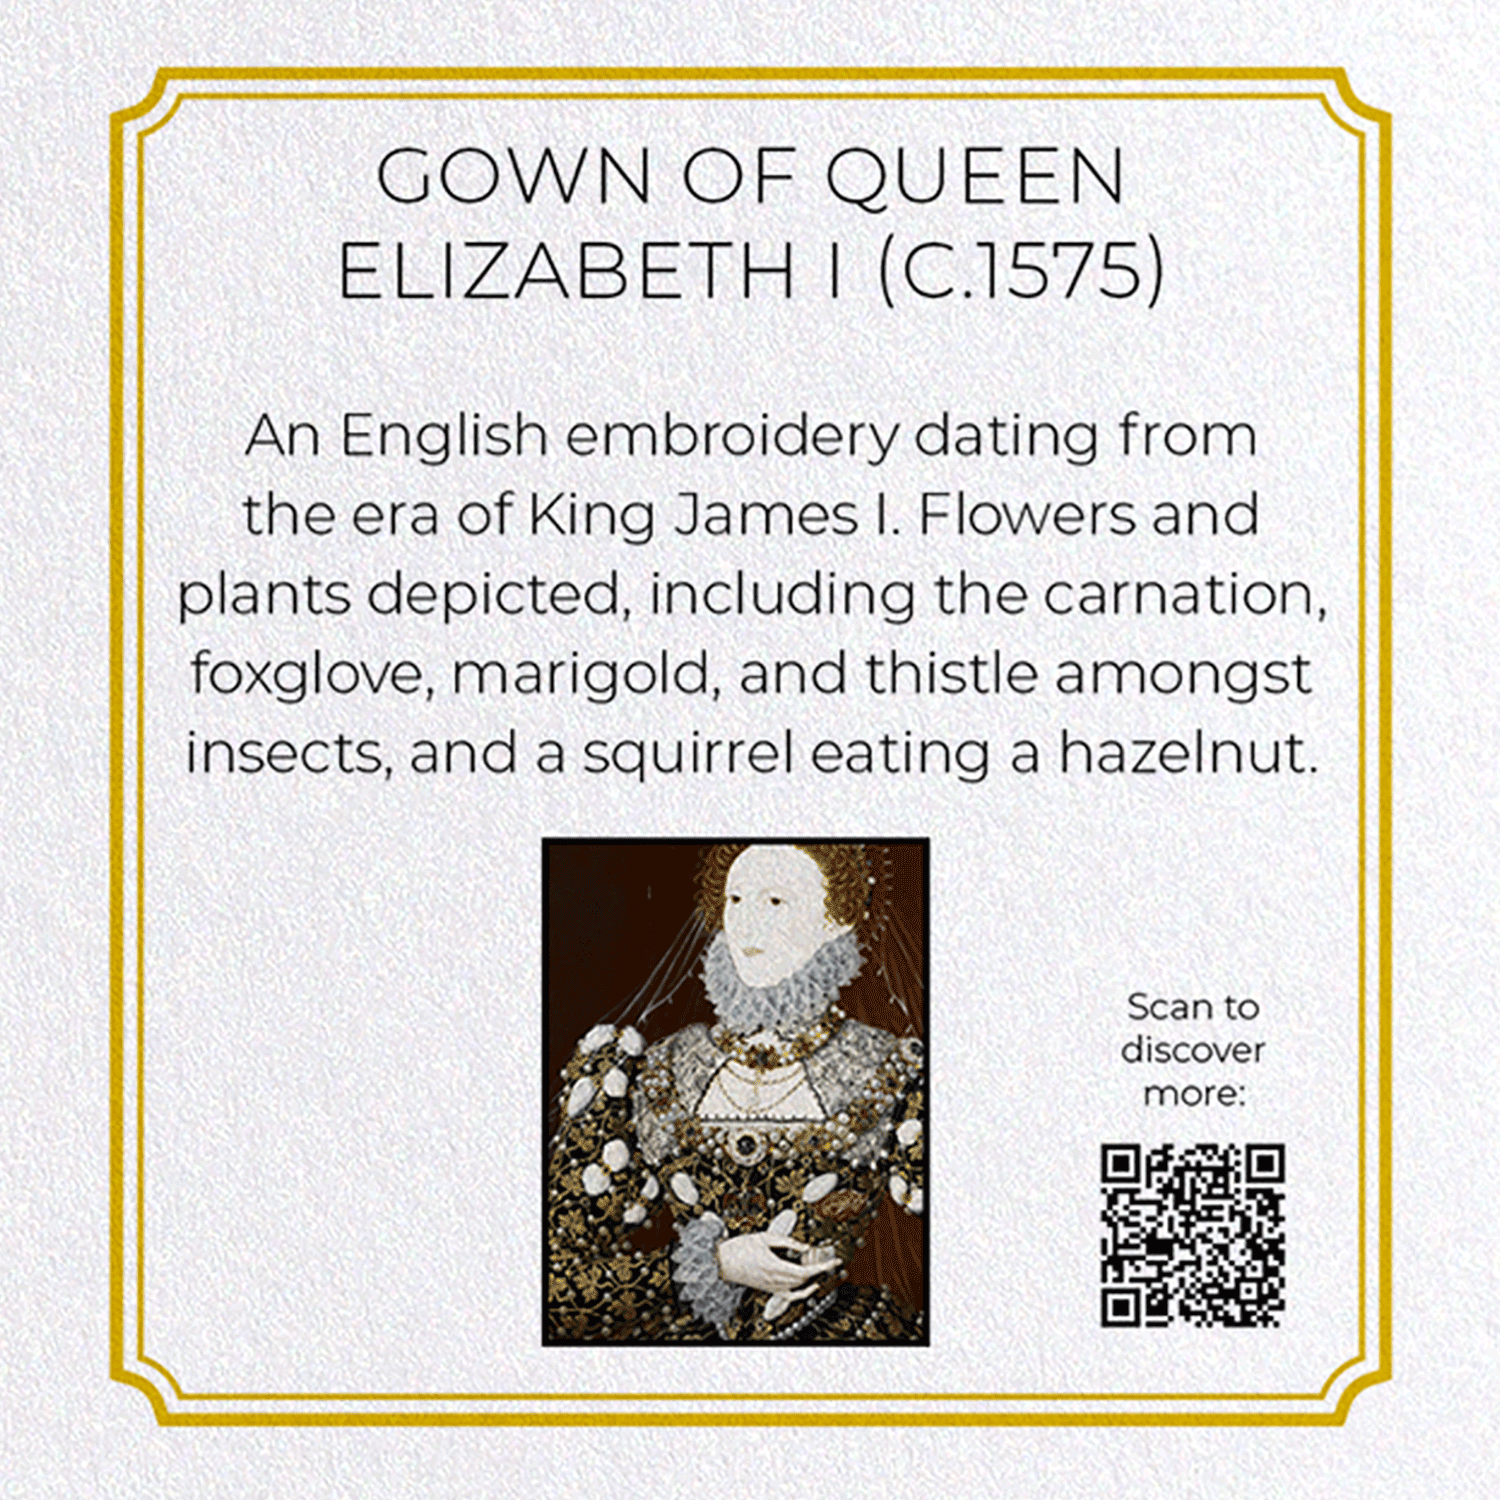 GOWN OF QUEEN ELIZABETH I (C.1575): Pattern Greeting Card